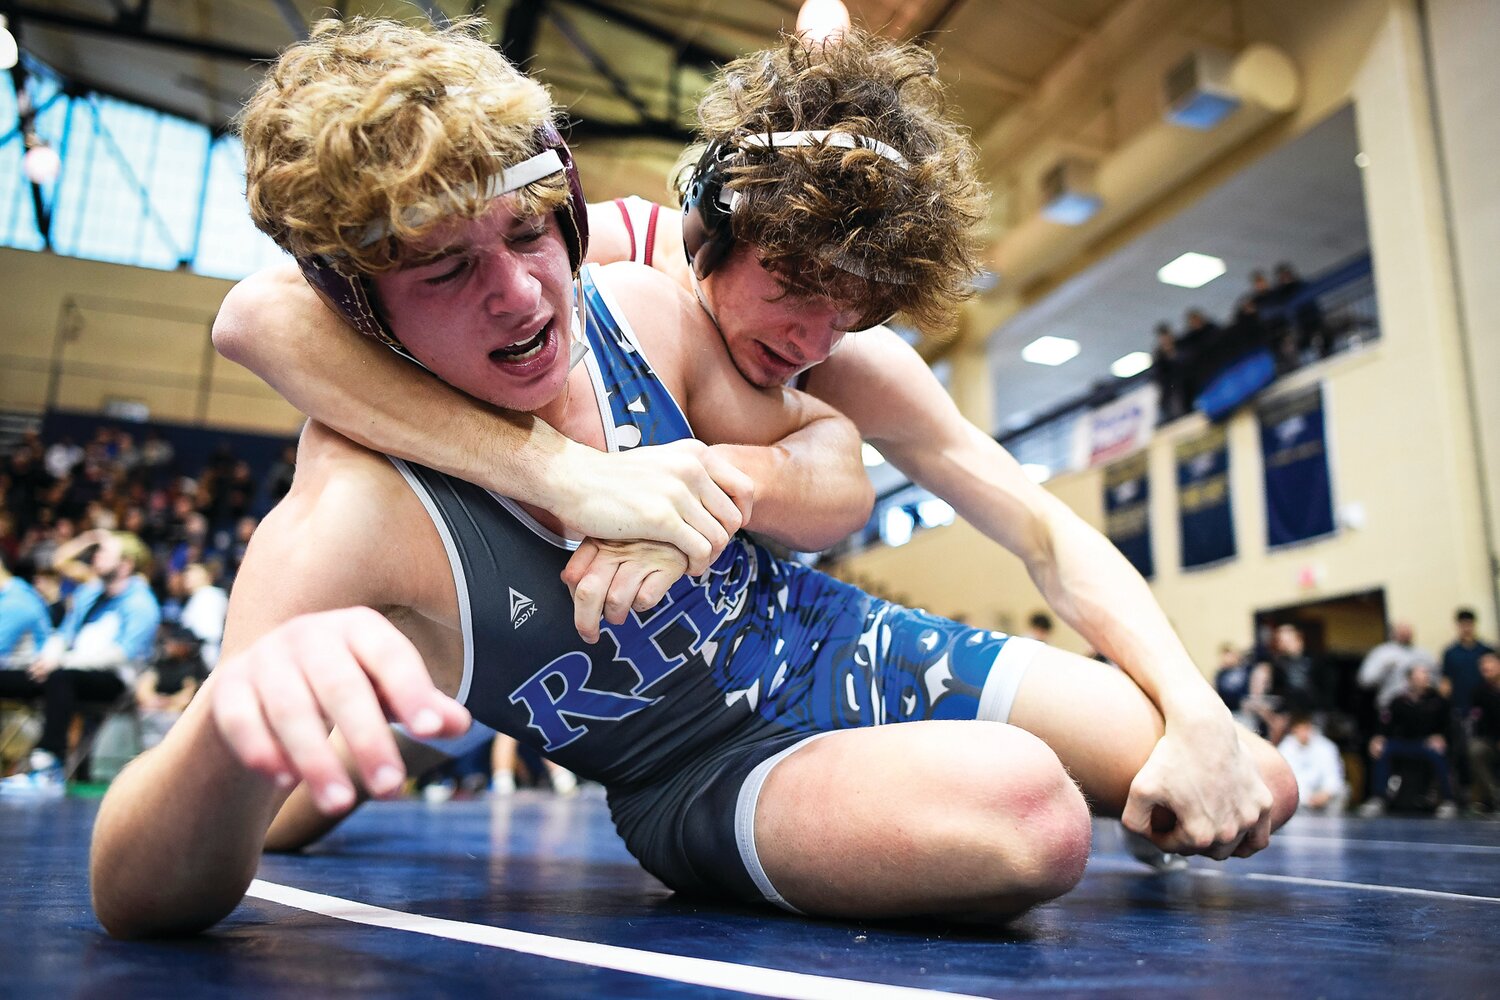 Faith Christian’s Max Stein has the upper hand on Riverbend’s Carson Main in the 152-pound weight class.